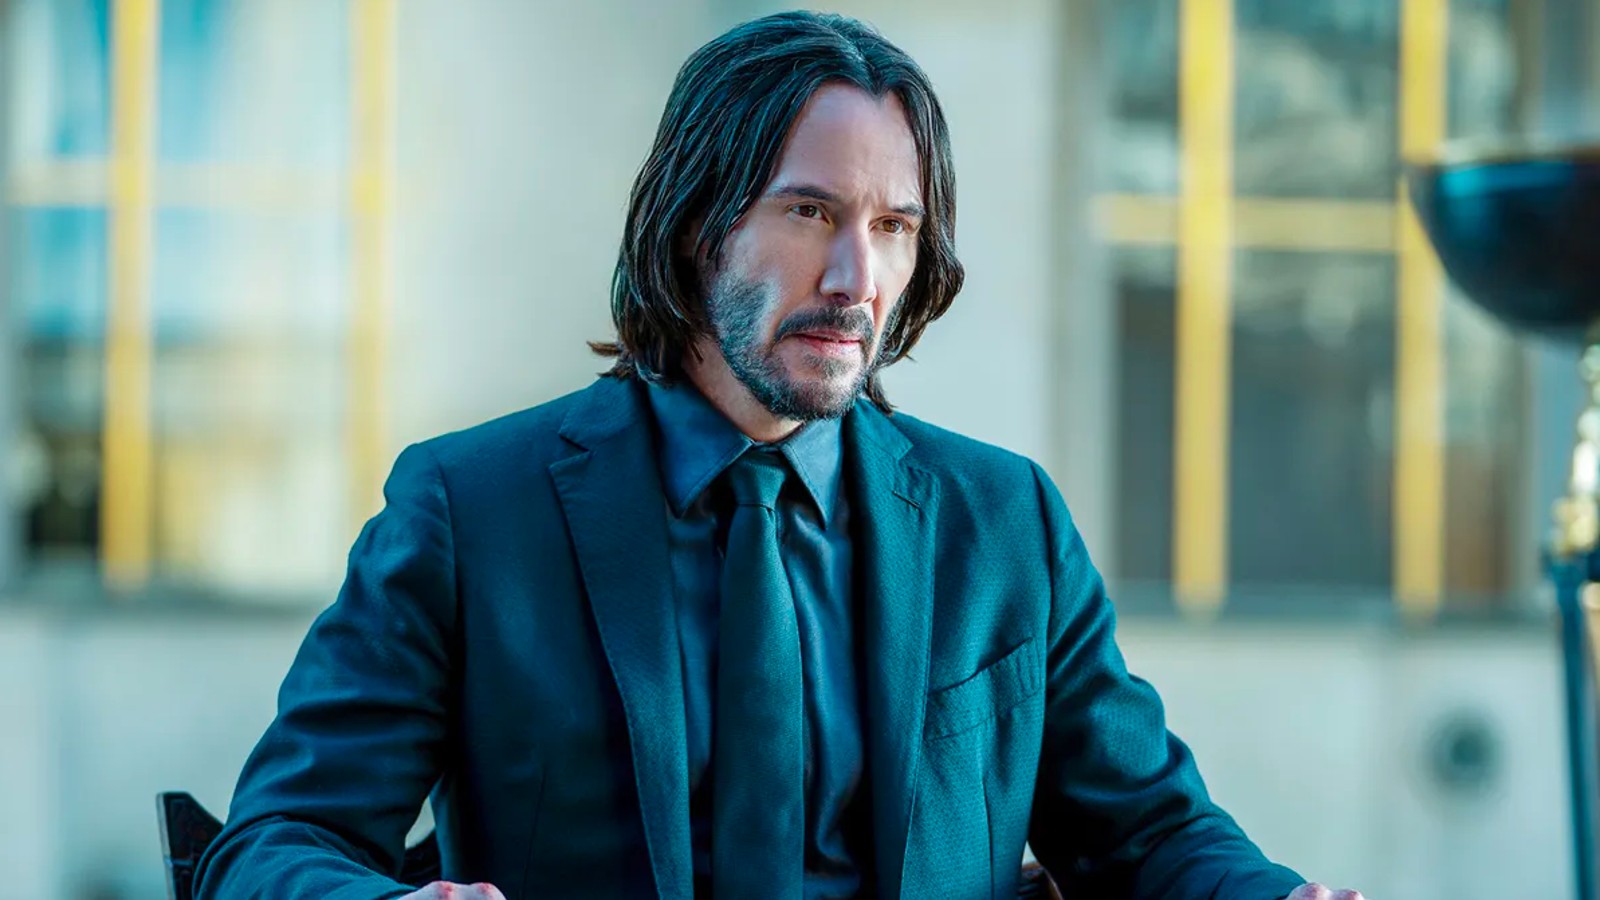 Now THIS is a Pencil - John Wick Build 